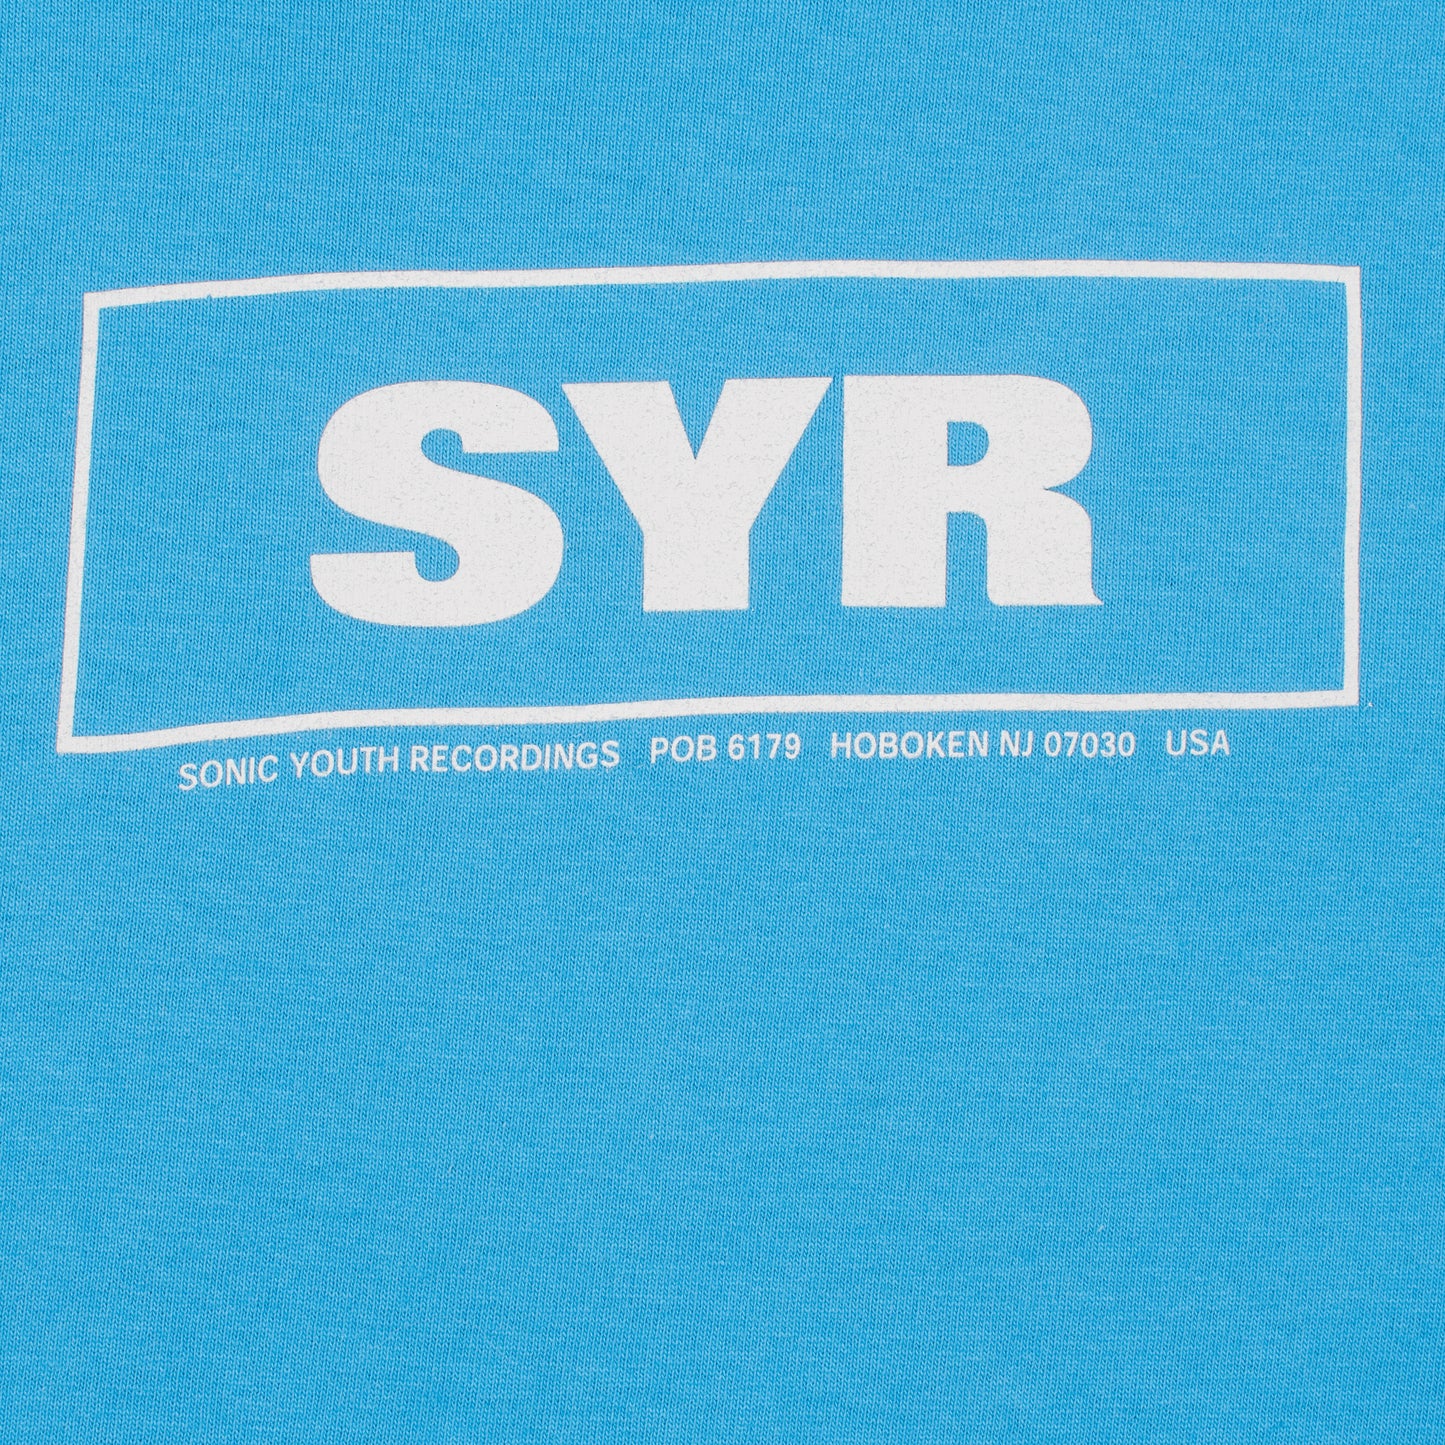 Vintage 90’s Sonic Youth Recordings T-Shirt